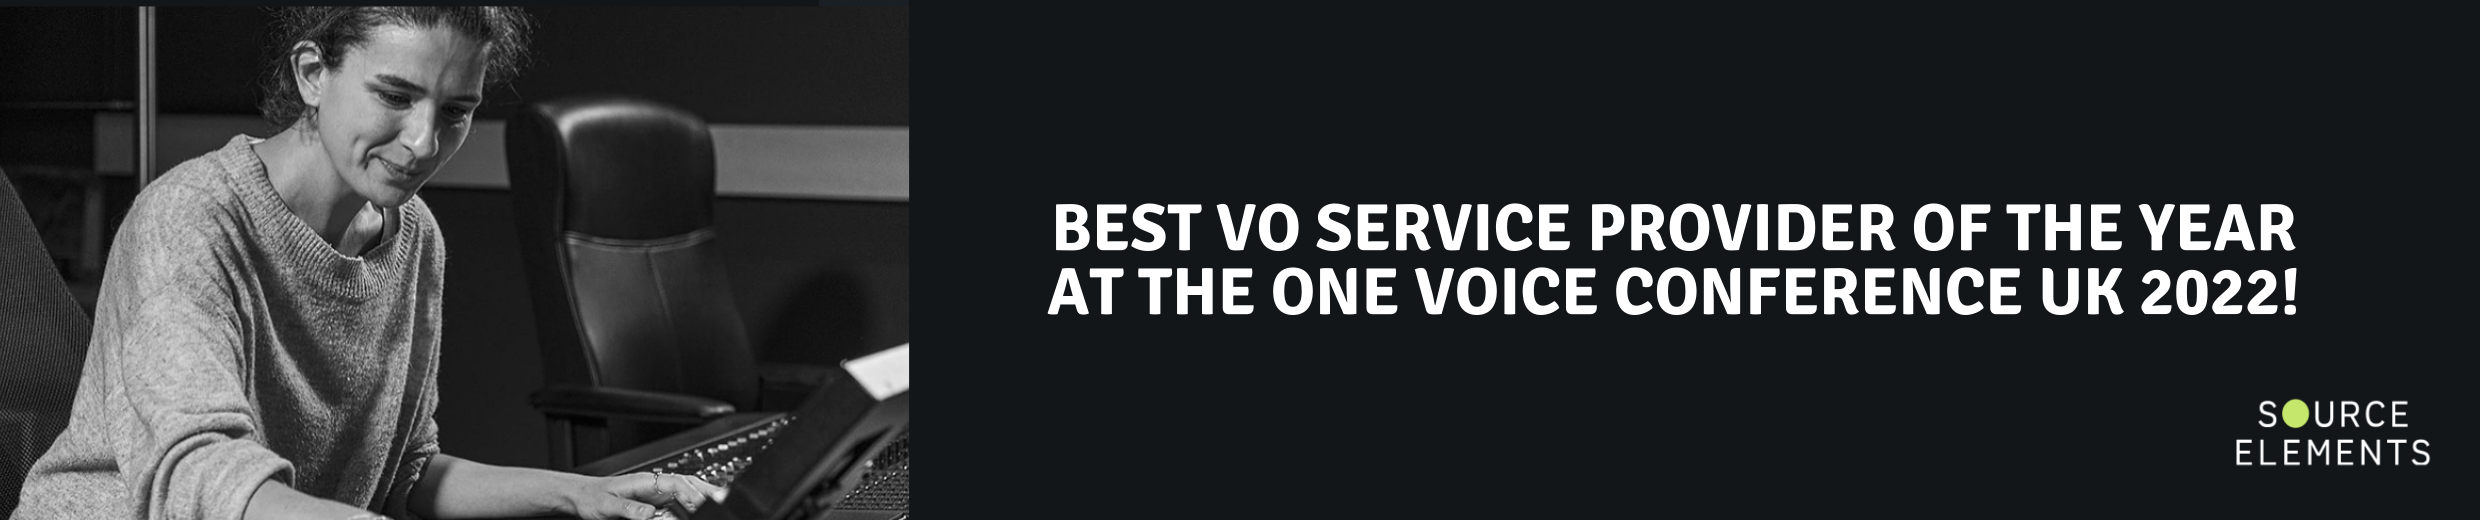 Best VO Service Provider of the Year at the One Voice Conference UK 2022